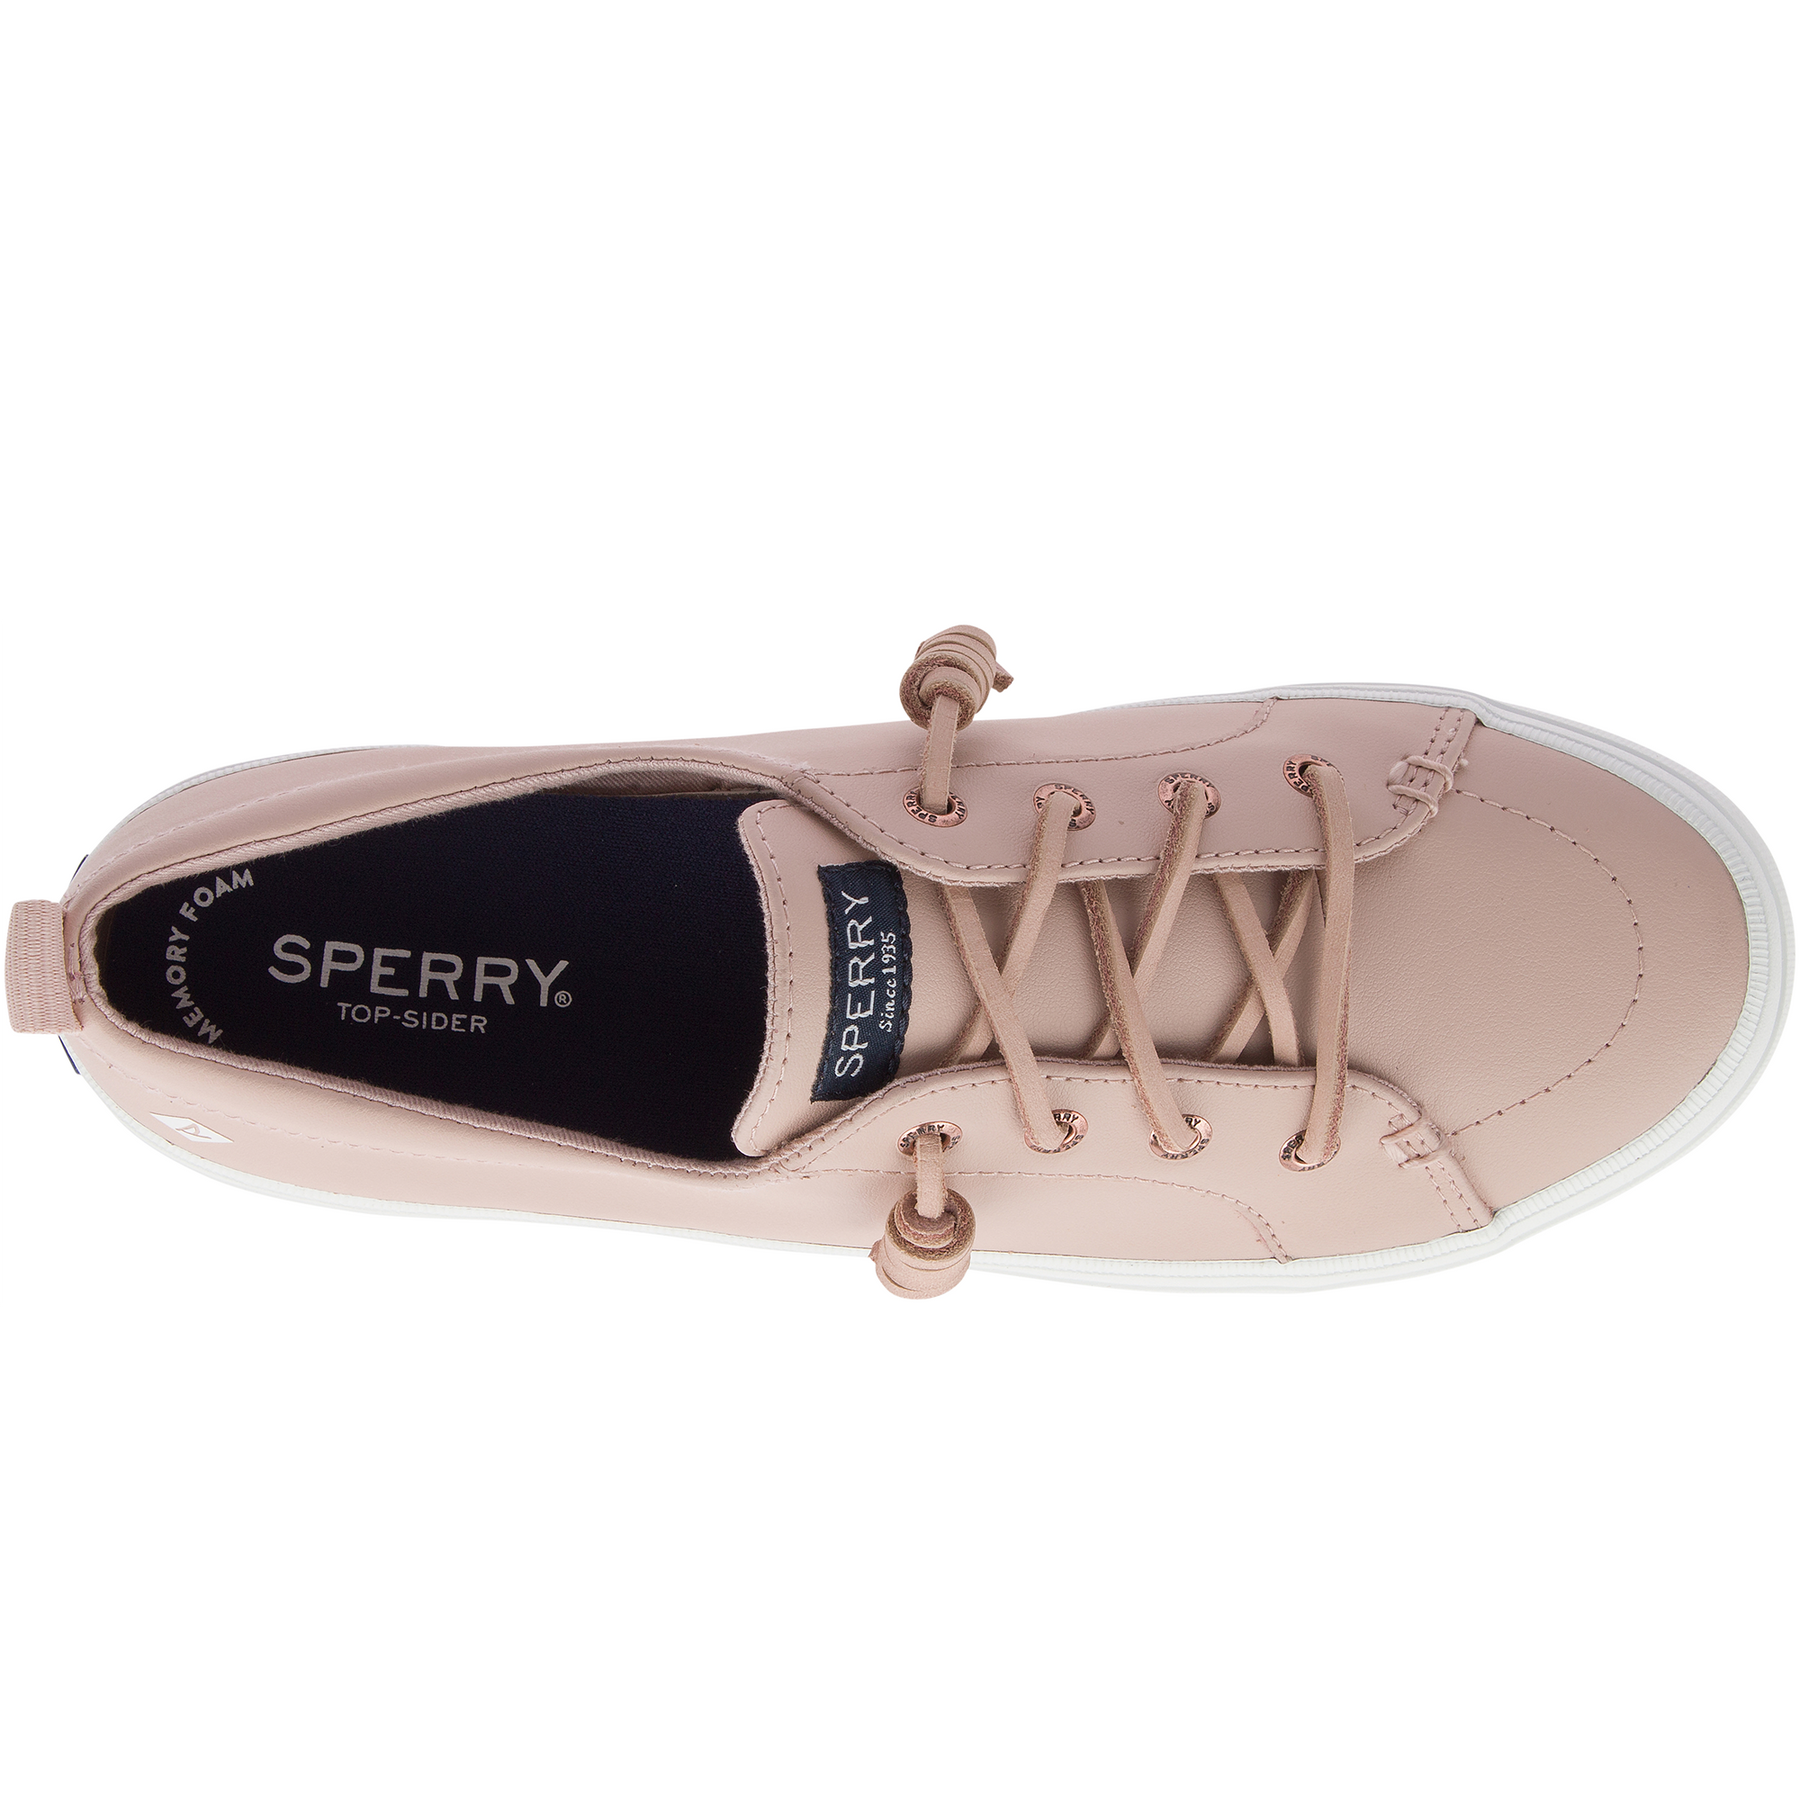 Women's Crest Vibe Leather Rose Dust Sneaker (STS84598)